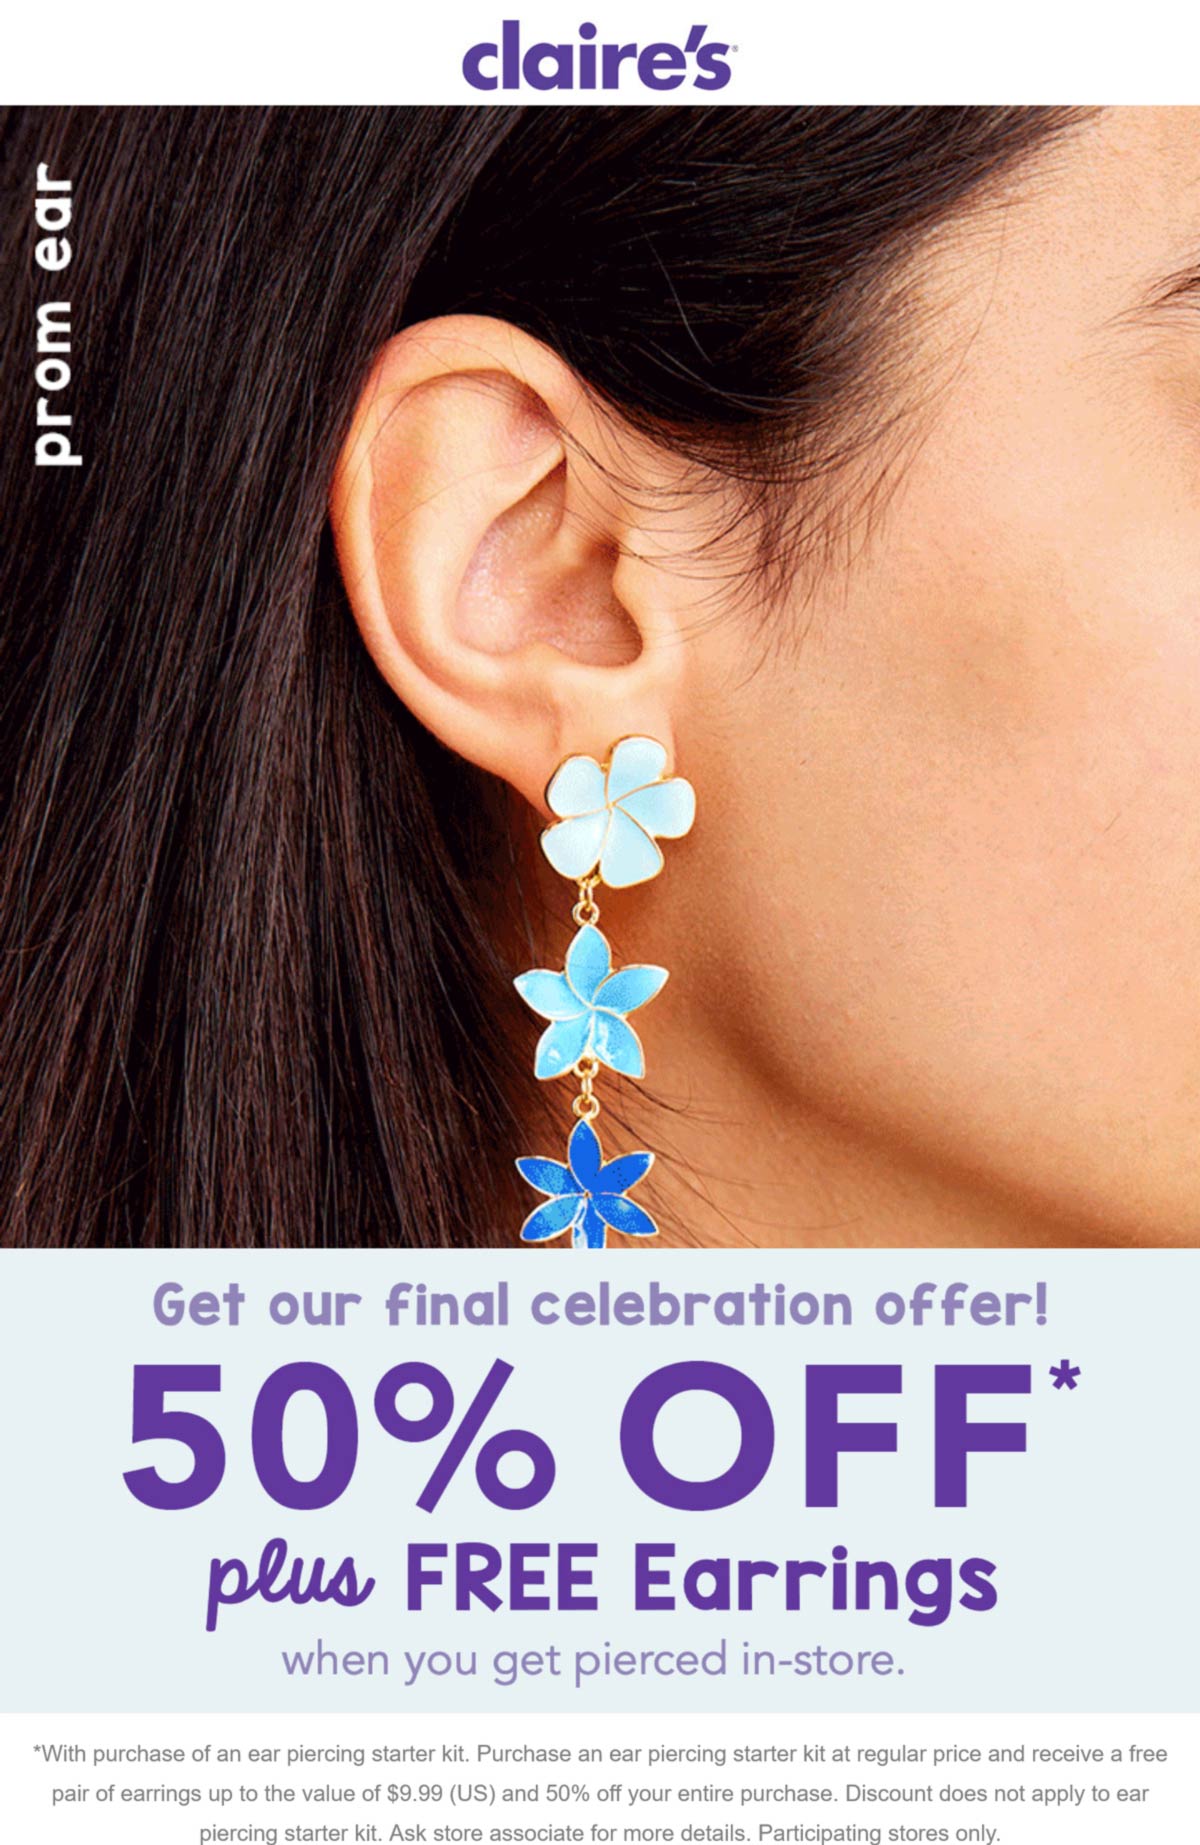 50 off + free earrings with your piercing today at Claires claires